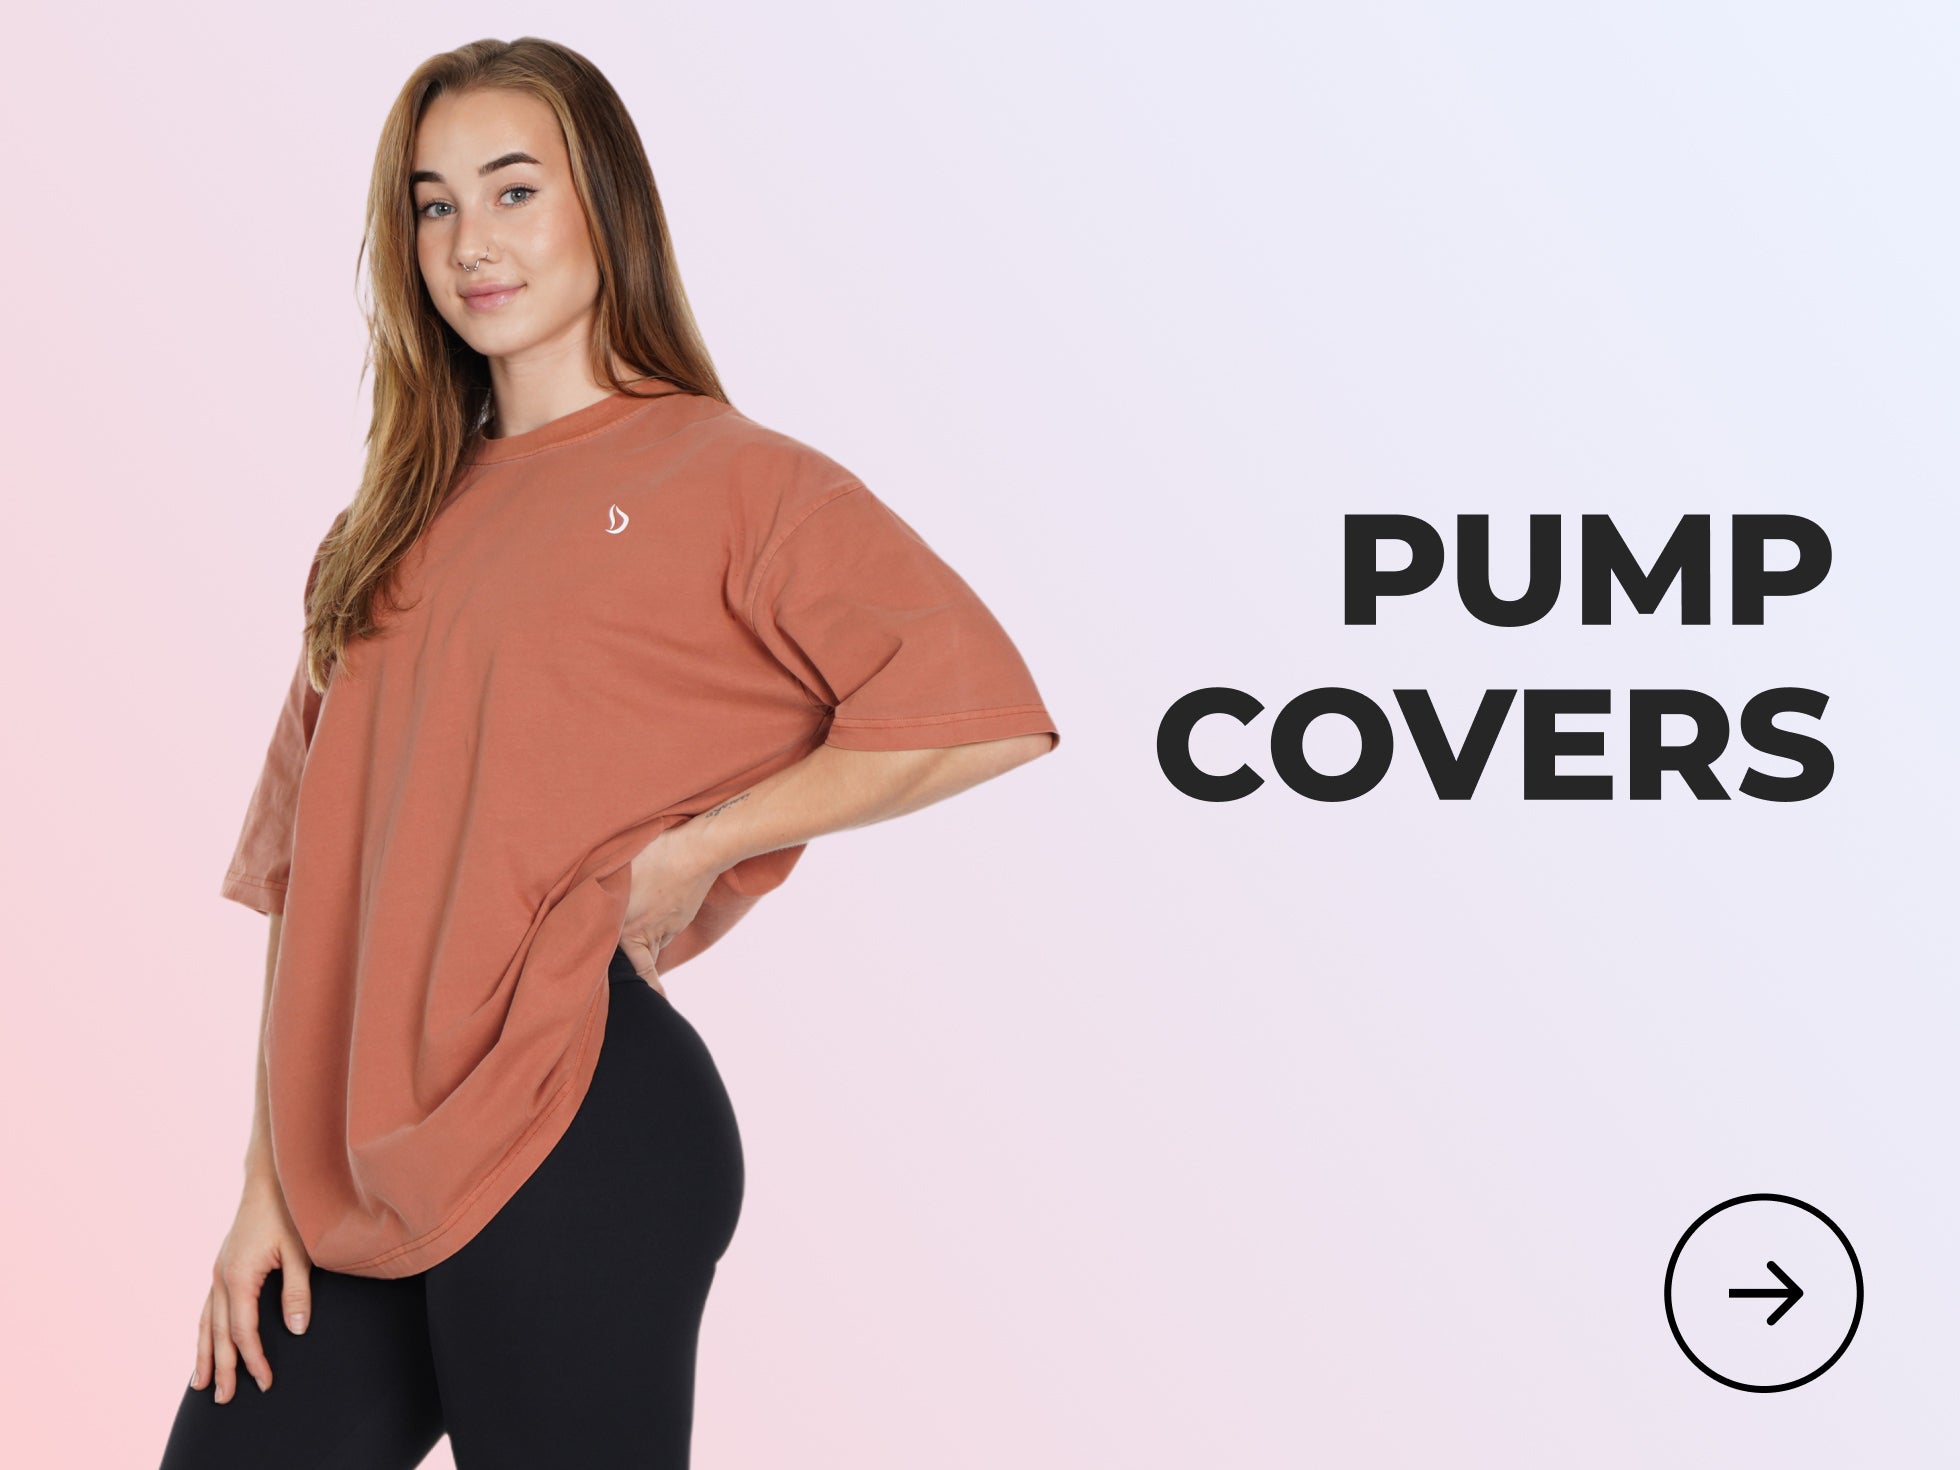 Devoteewear.com Oversized Shirts and pump covers: Comfortable and Stylish T-shirts for Women and Men.